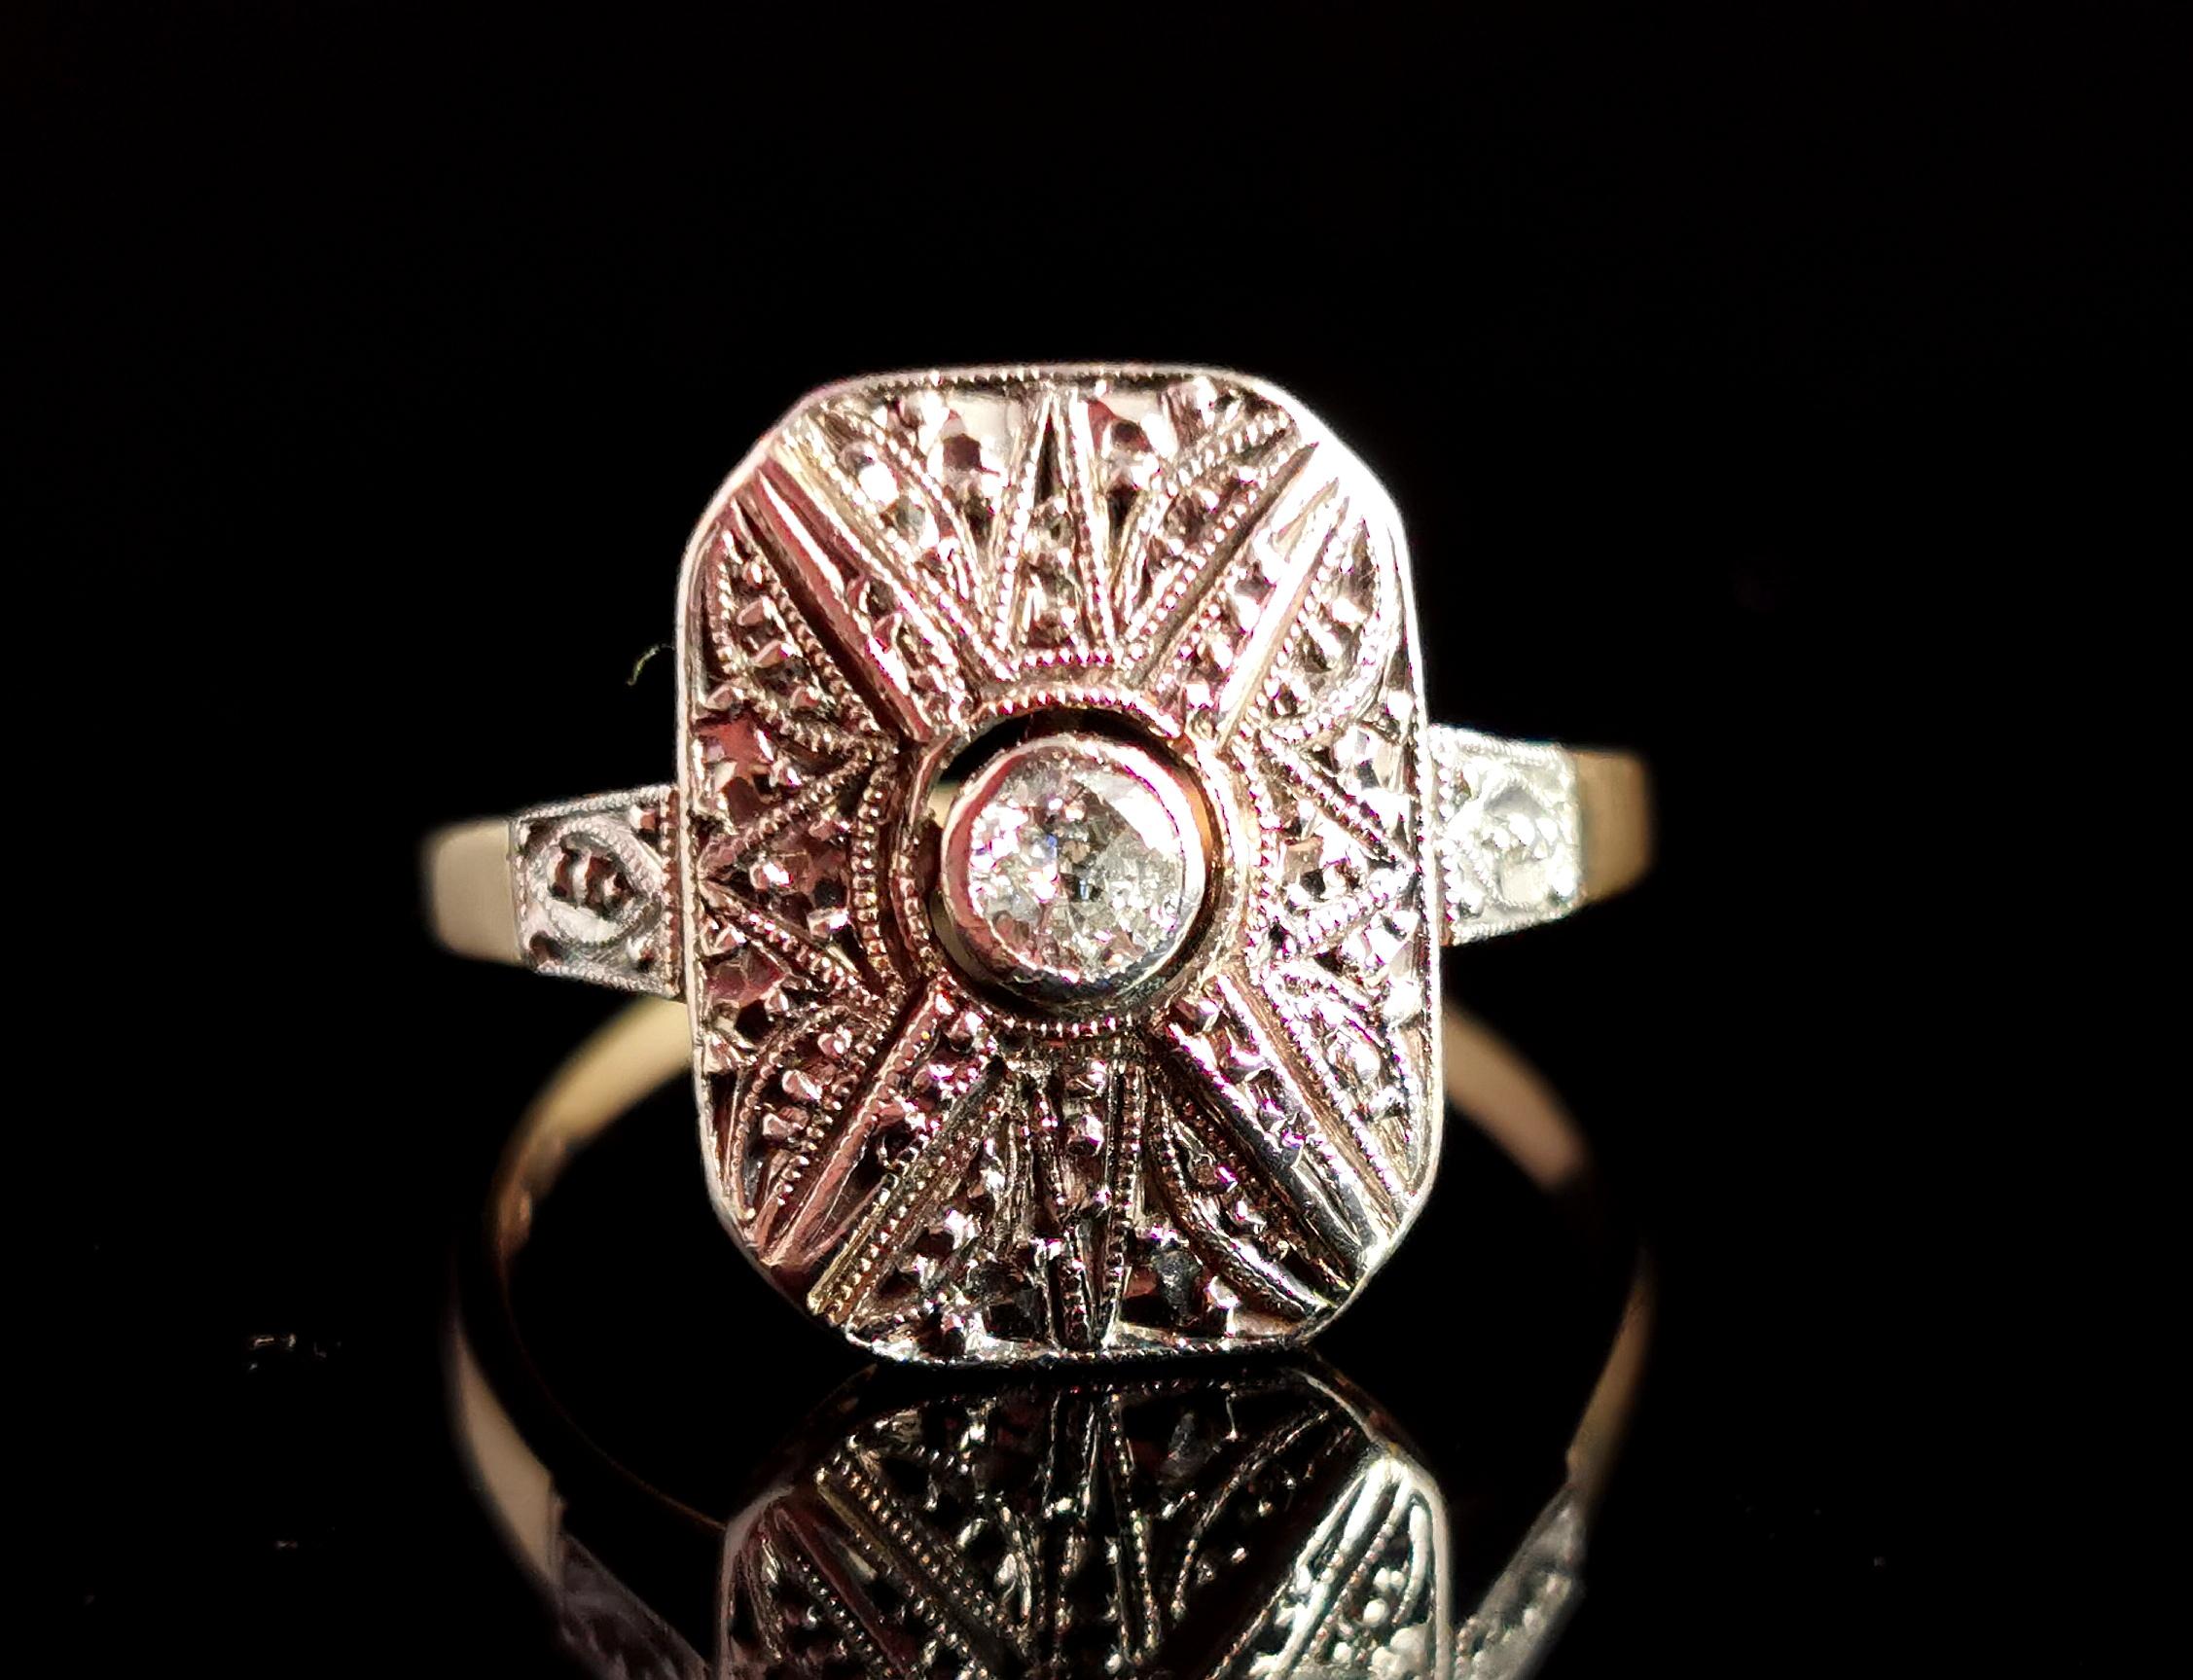 An absolutely stunning vintage, Art Deco style diamond ring.

The ring features an incredible rectangular shaped illusion engraved central panel set to the centre with a beautiful sparkling single cut diamond.

The silver illusion setting is covered